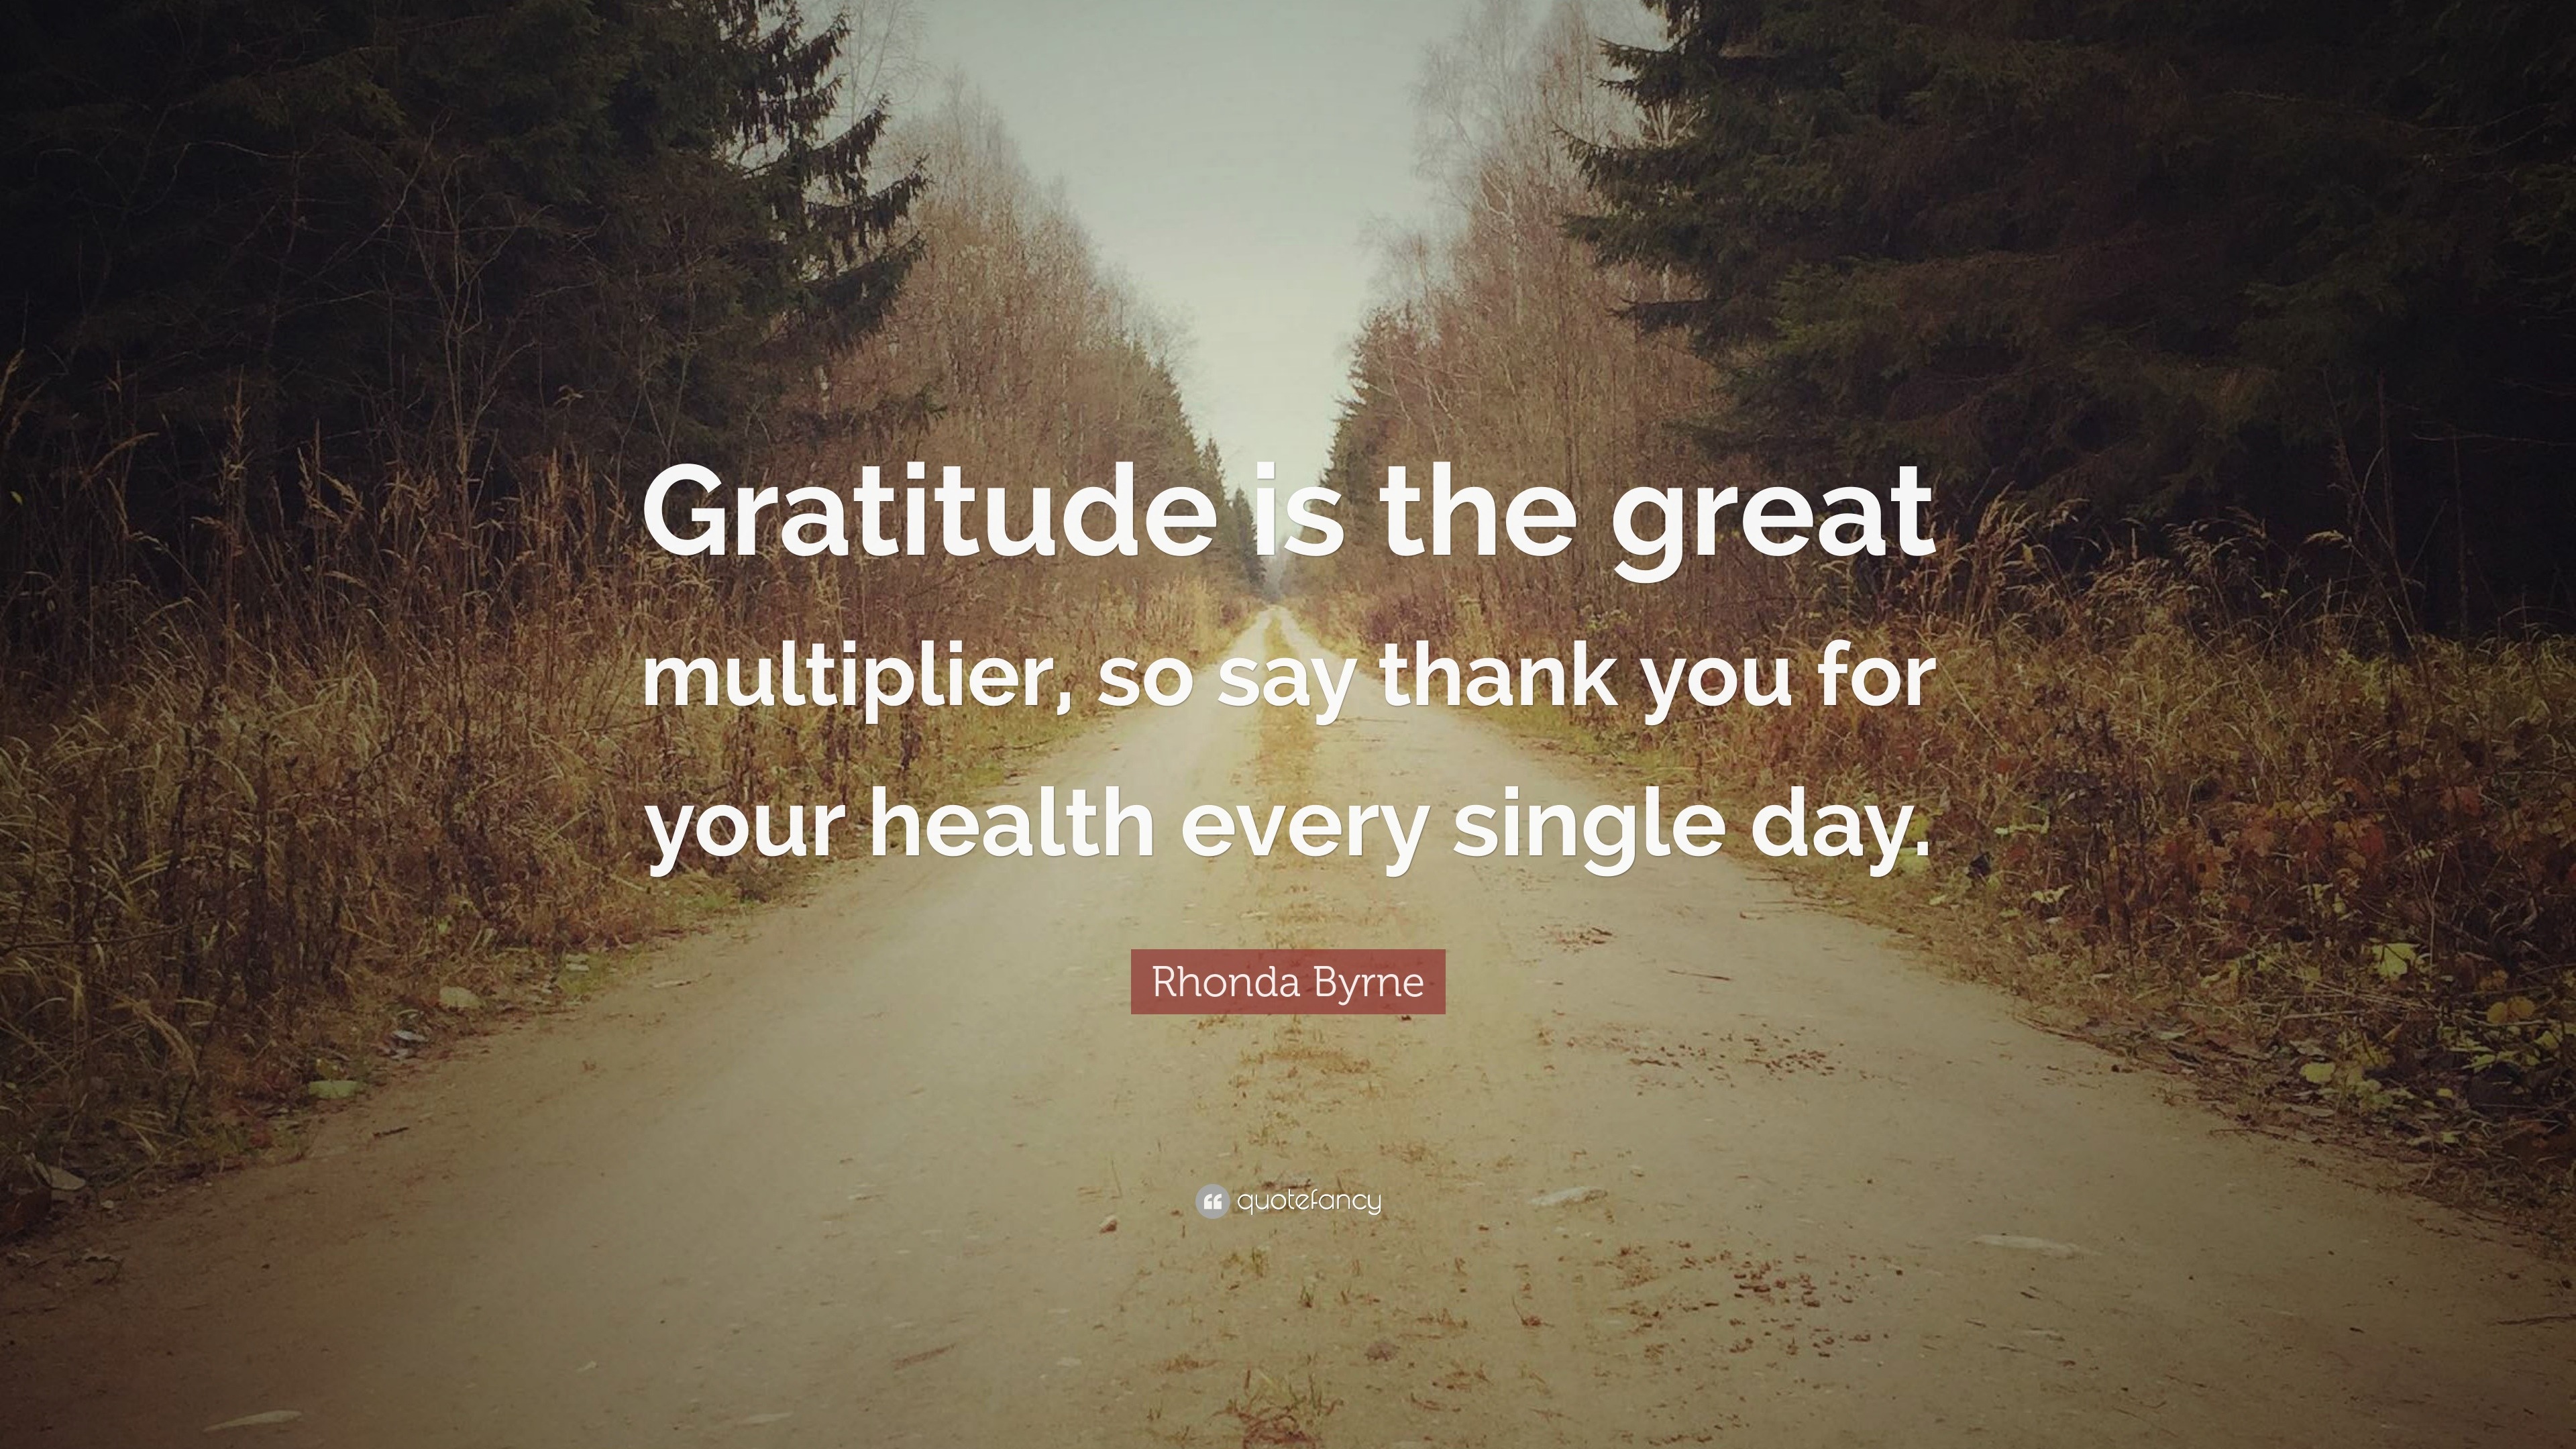 318861 Rhonda Byrne Quote Gratitude is the great multiplier so say thank